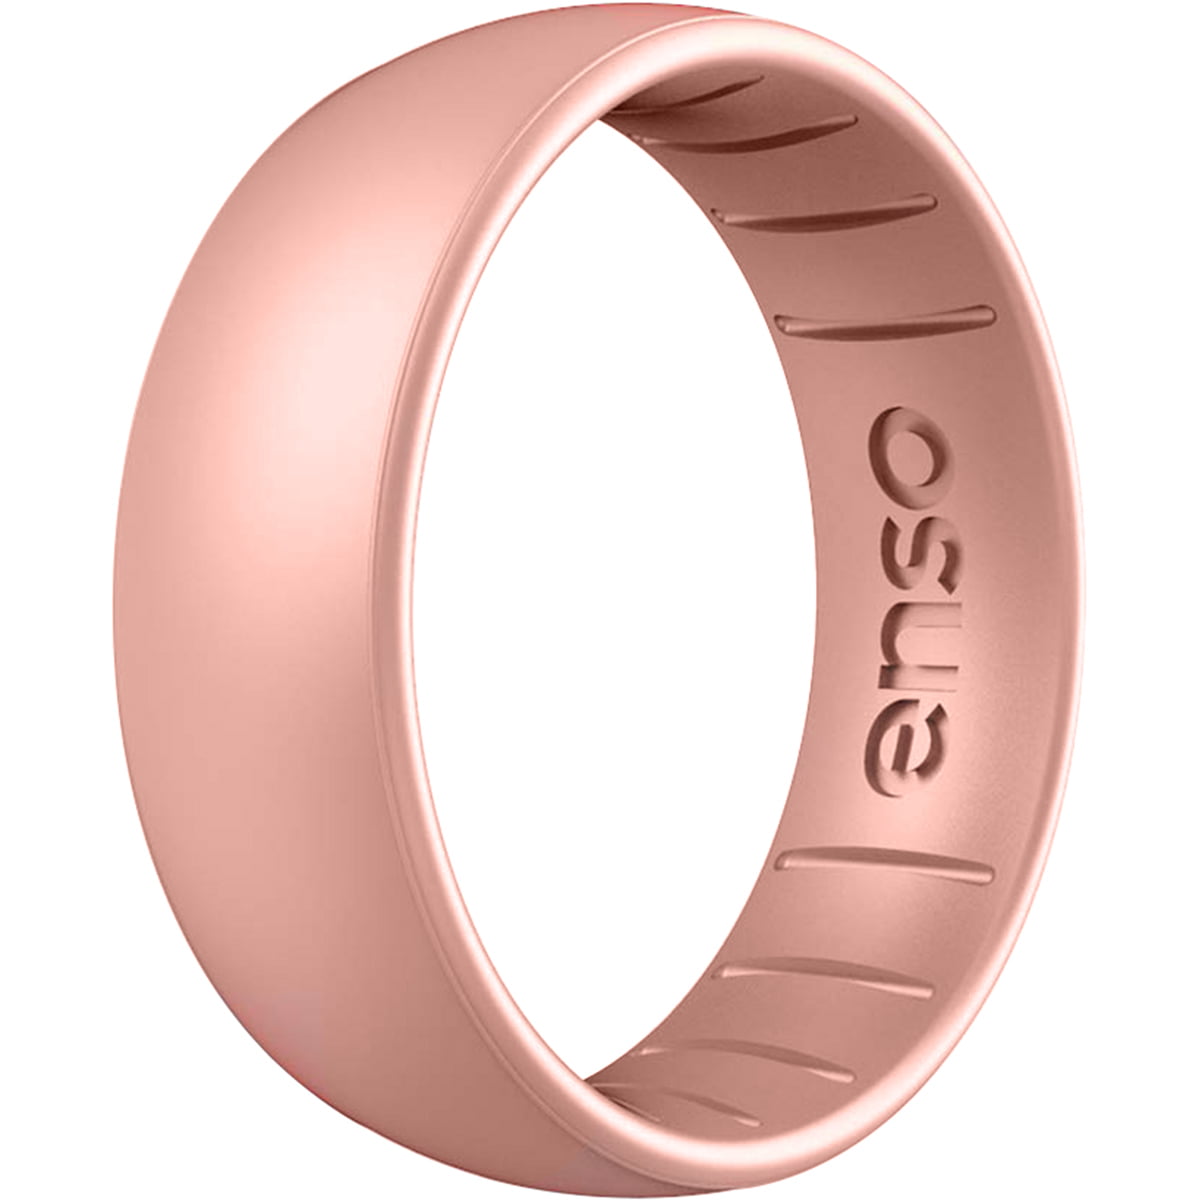 Elements Classic Thin Silicone Ring - Rose Gold